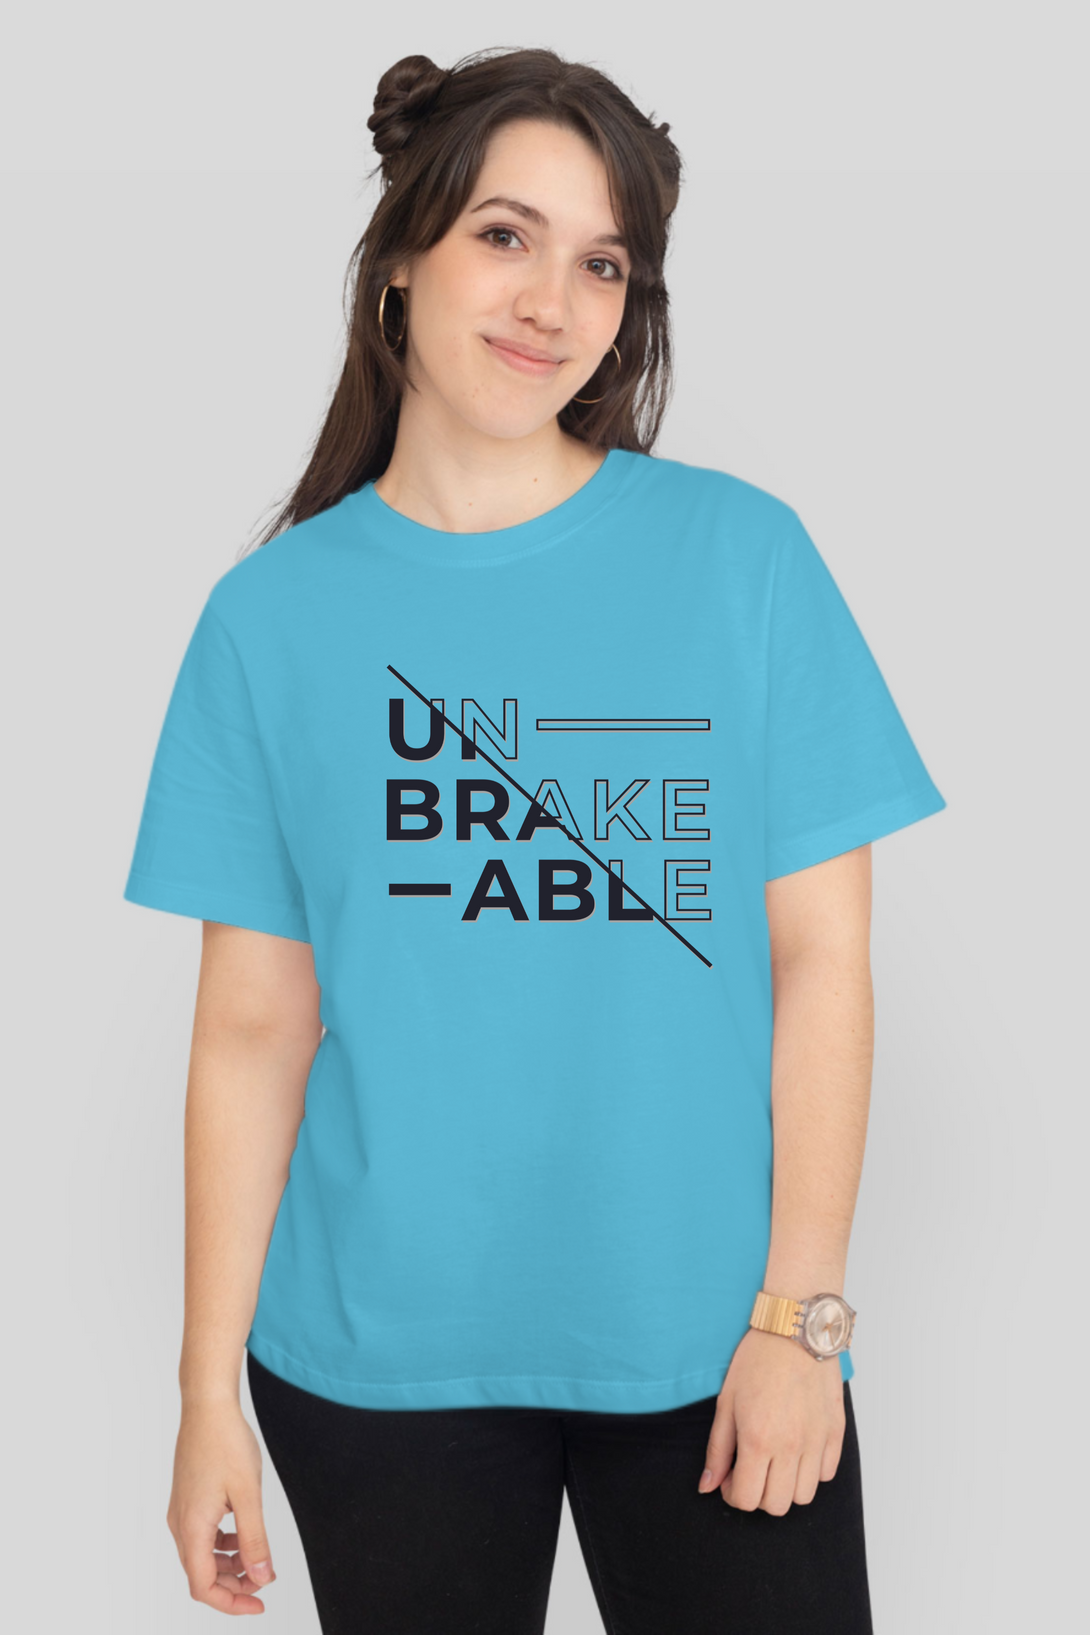 Unbreakable Printed T-Shirt For Women - WowWaves - 10